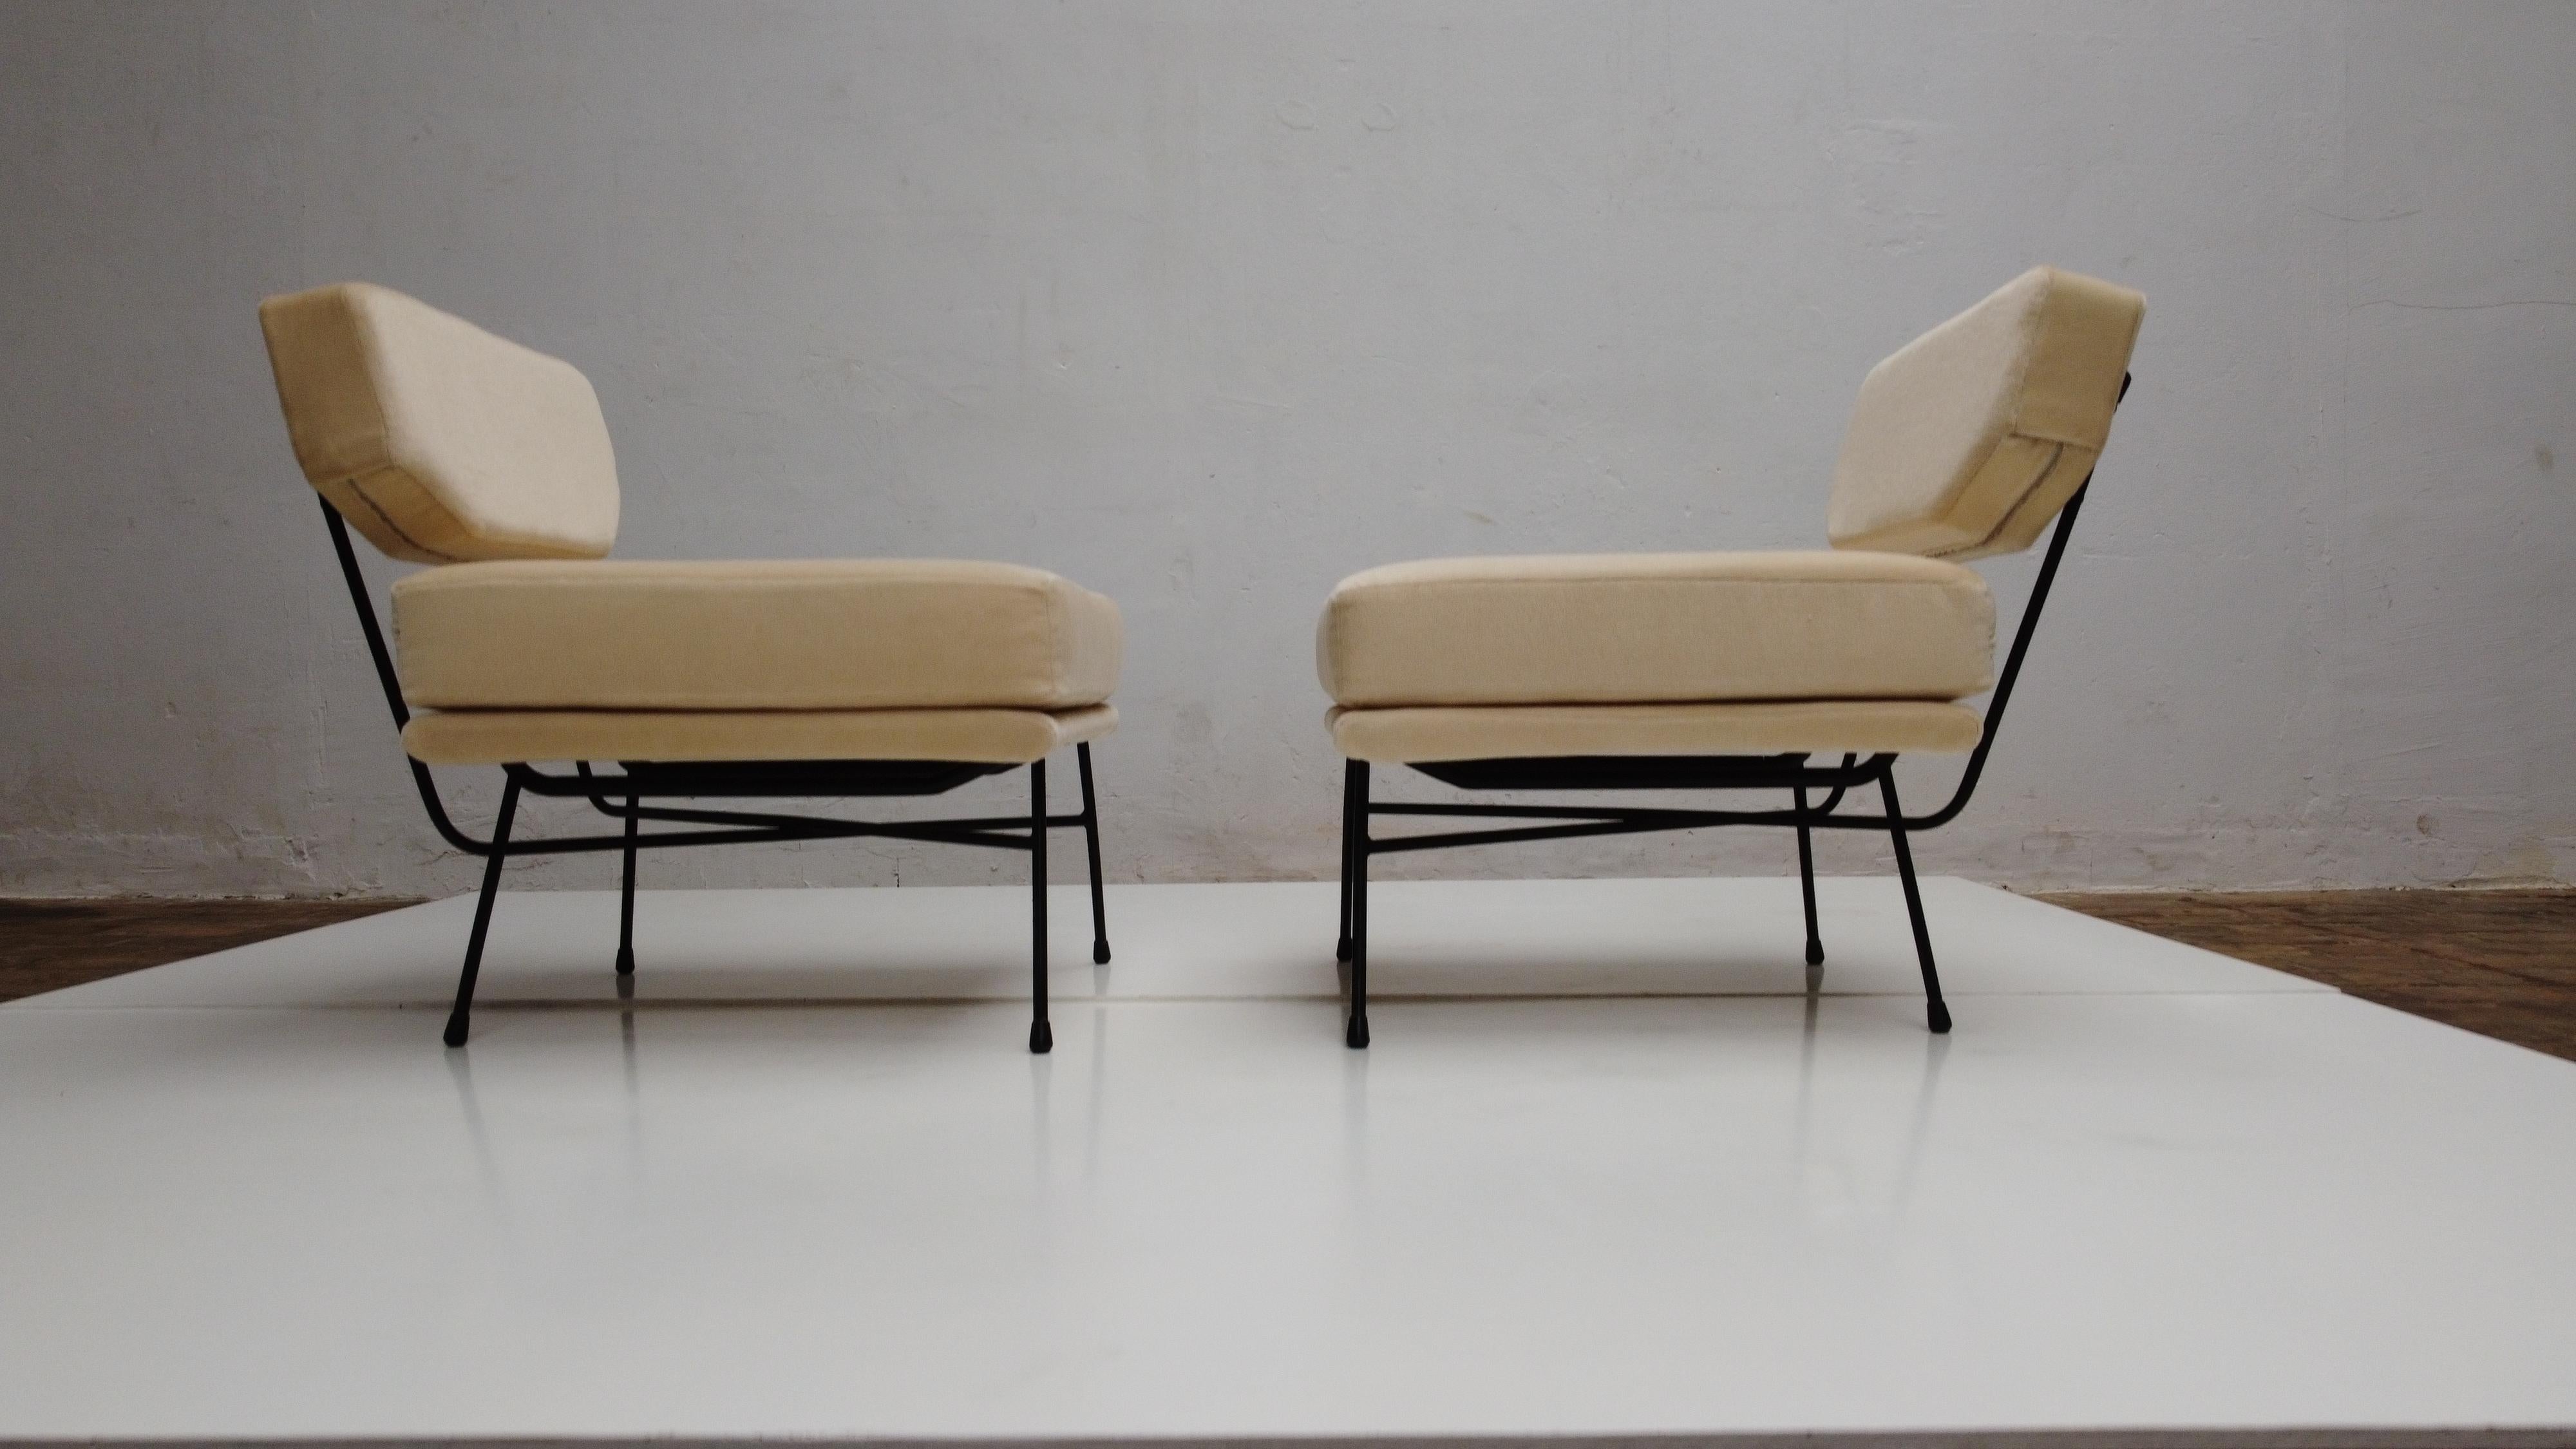 Pair of 'Elettra' Lounge Chairs by BBPR, Arflex, Italy 1953, Compasso D'Oro 1954 4